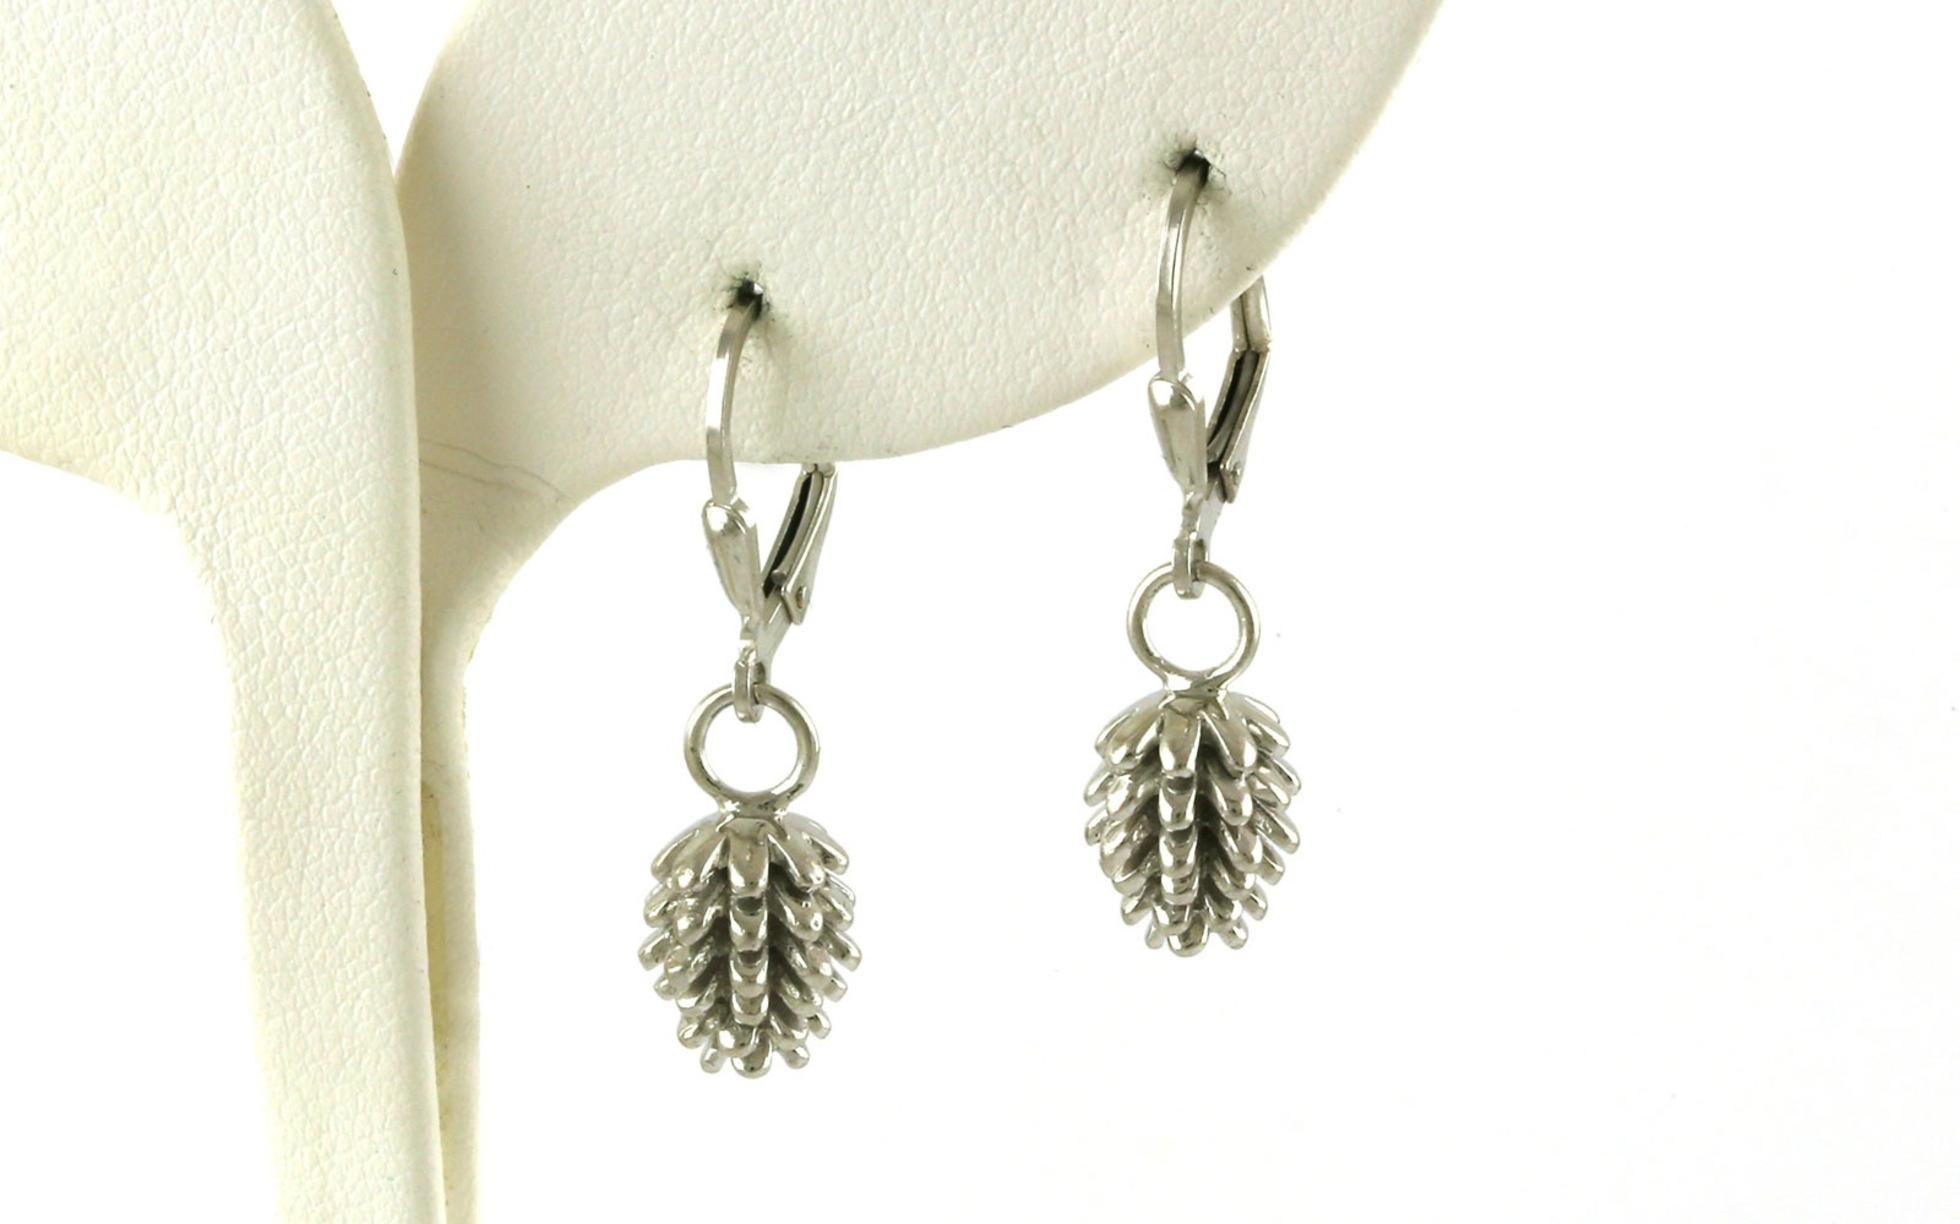 Pinecone Dangle Earrings with Leverbacks in Sterling Silver